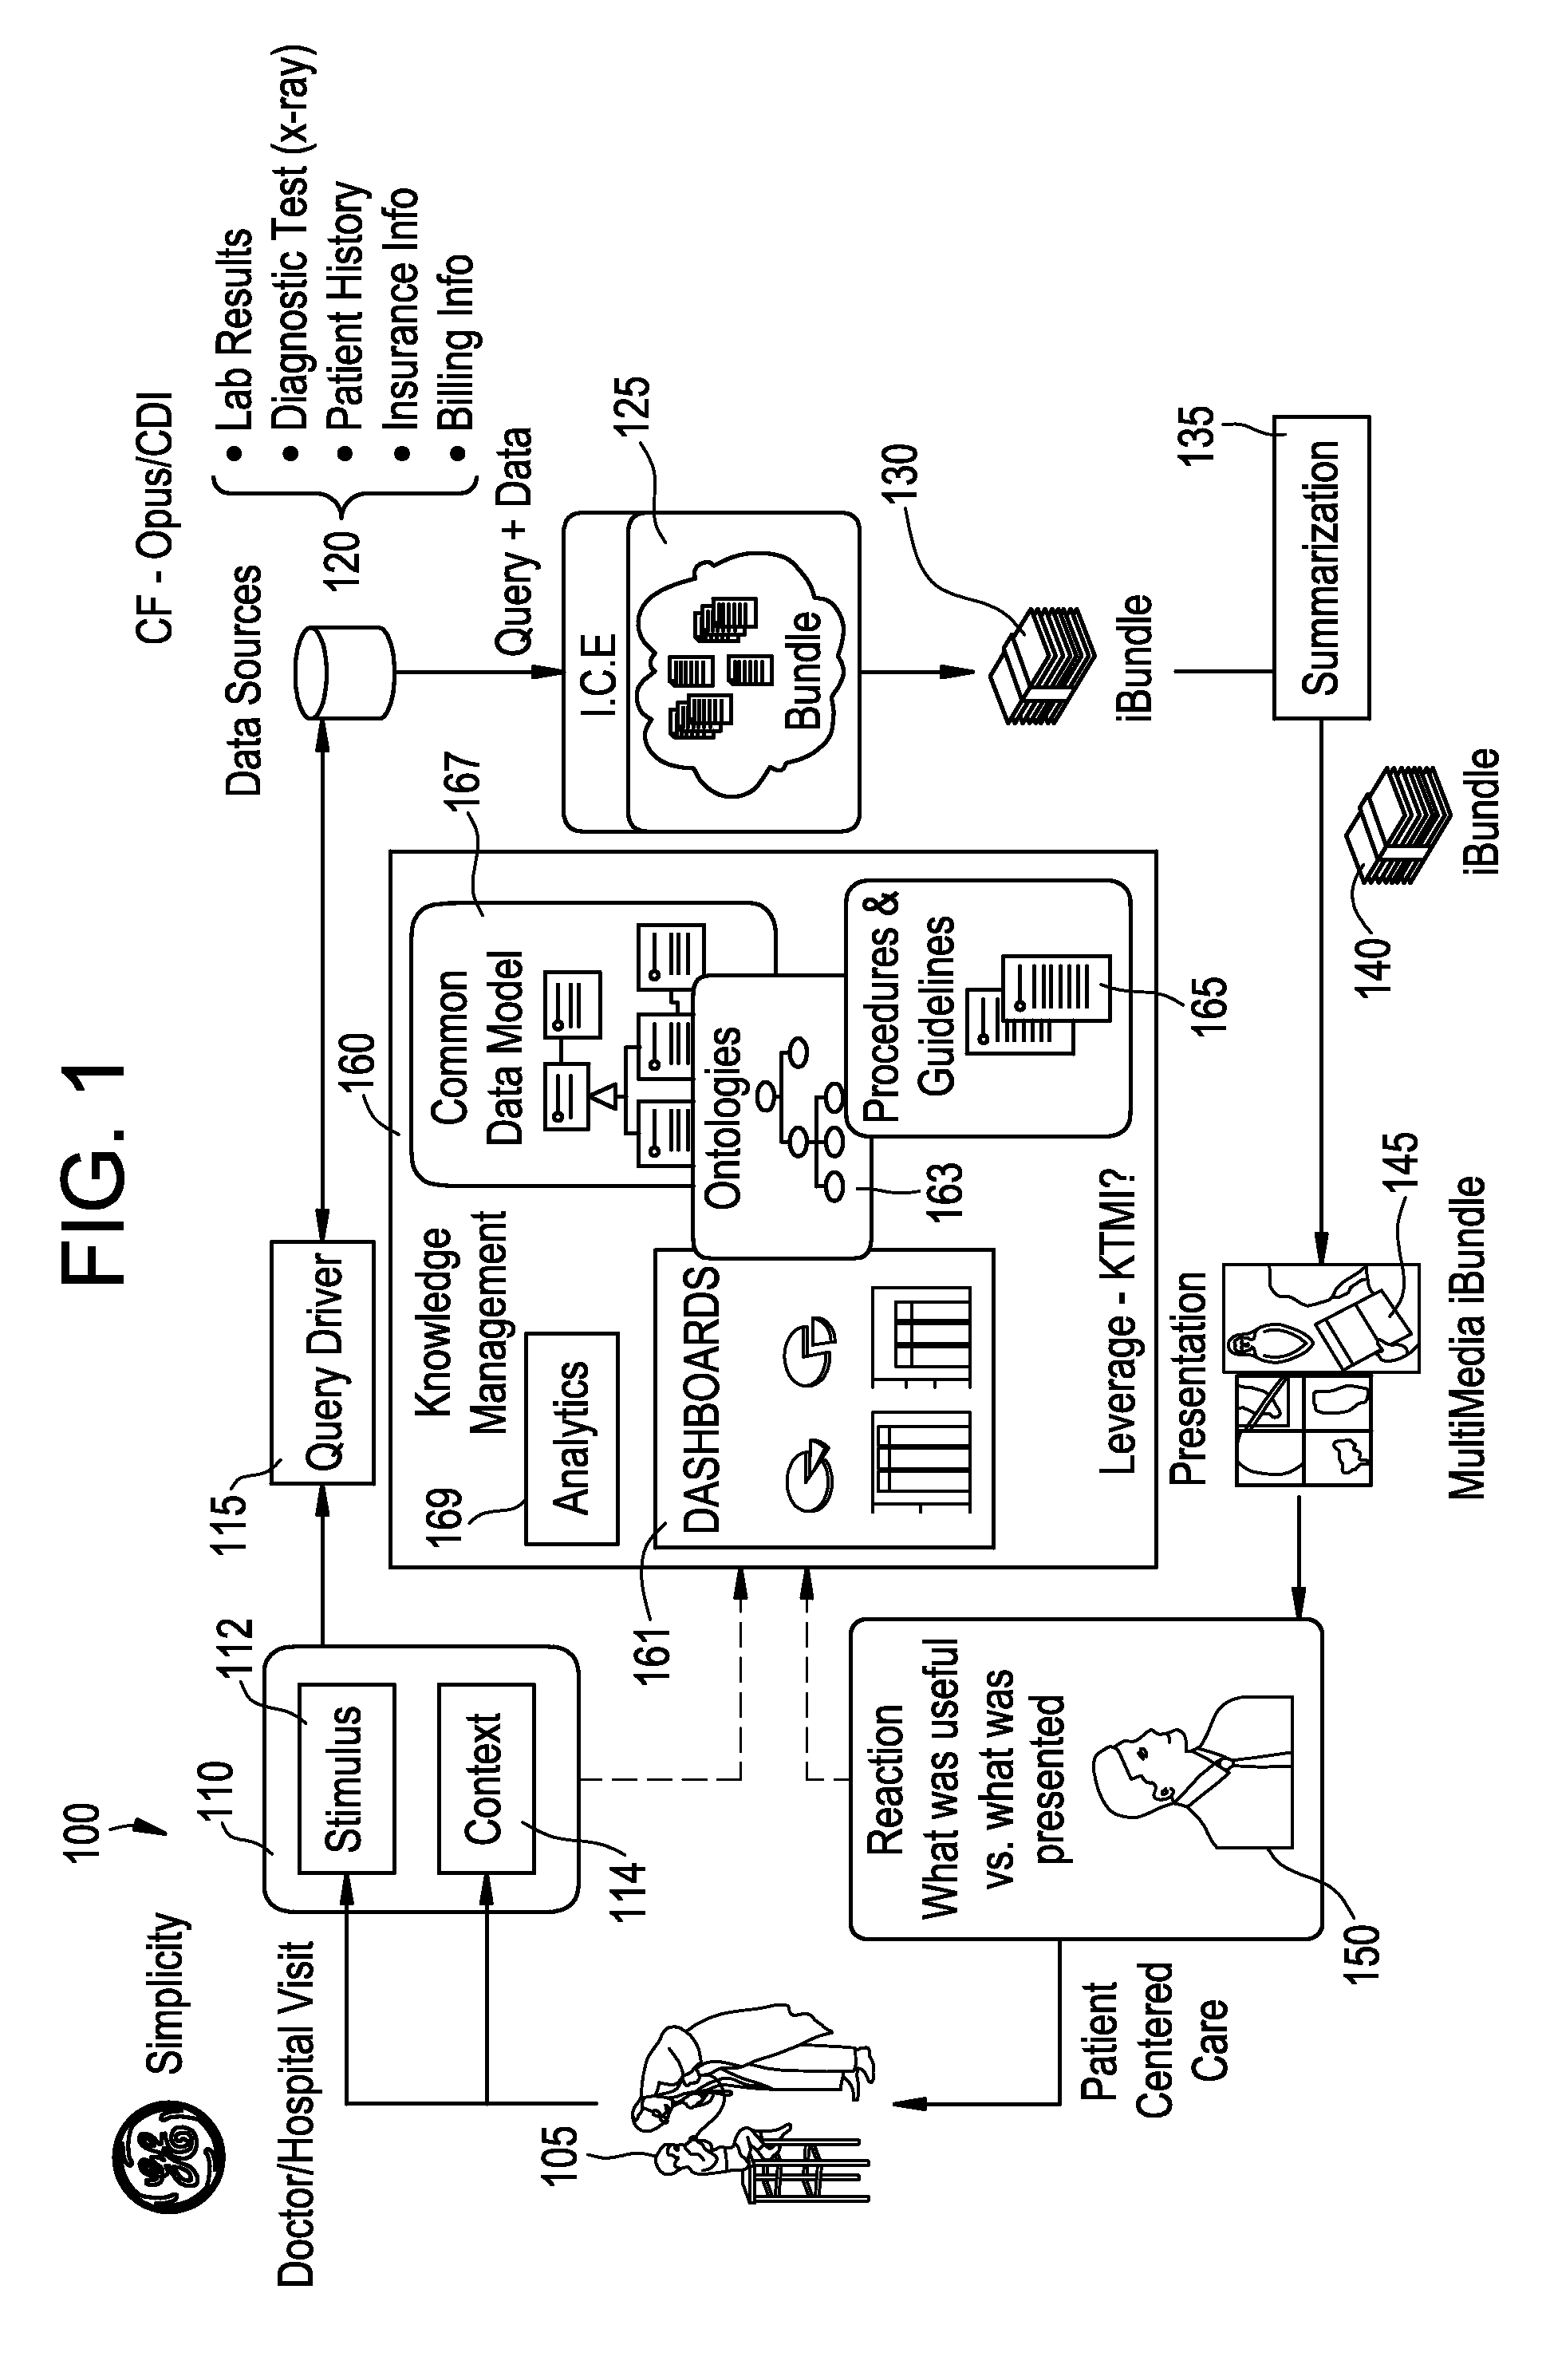 Method and apparatus for dynamic multiresolution clinical data display